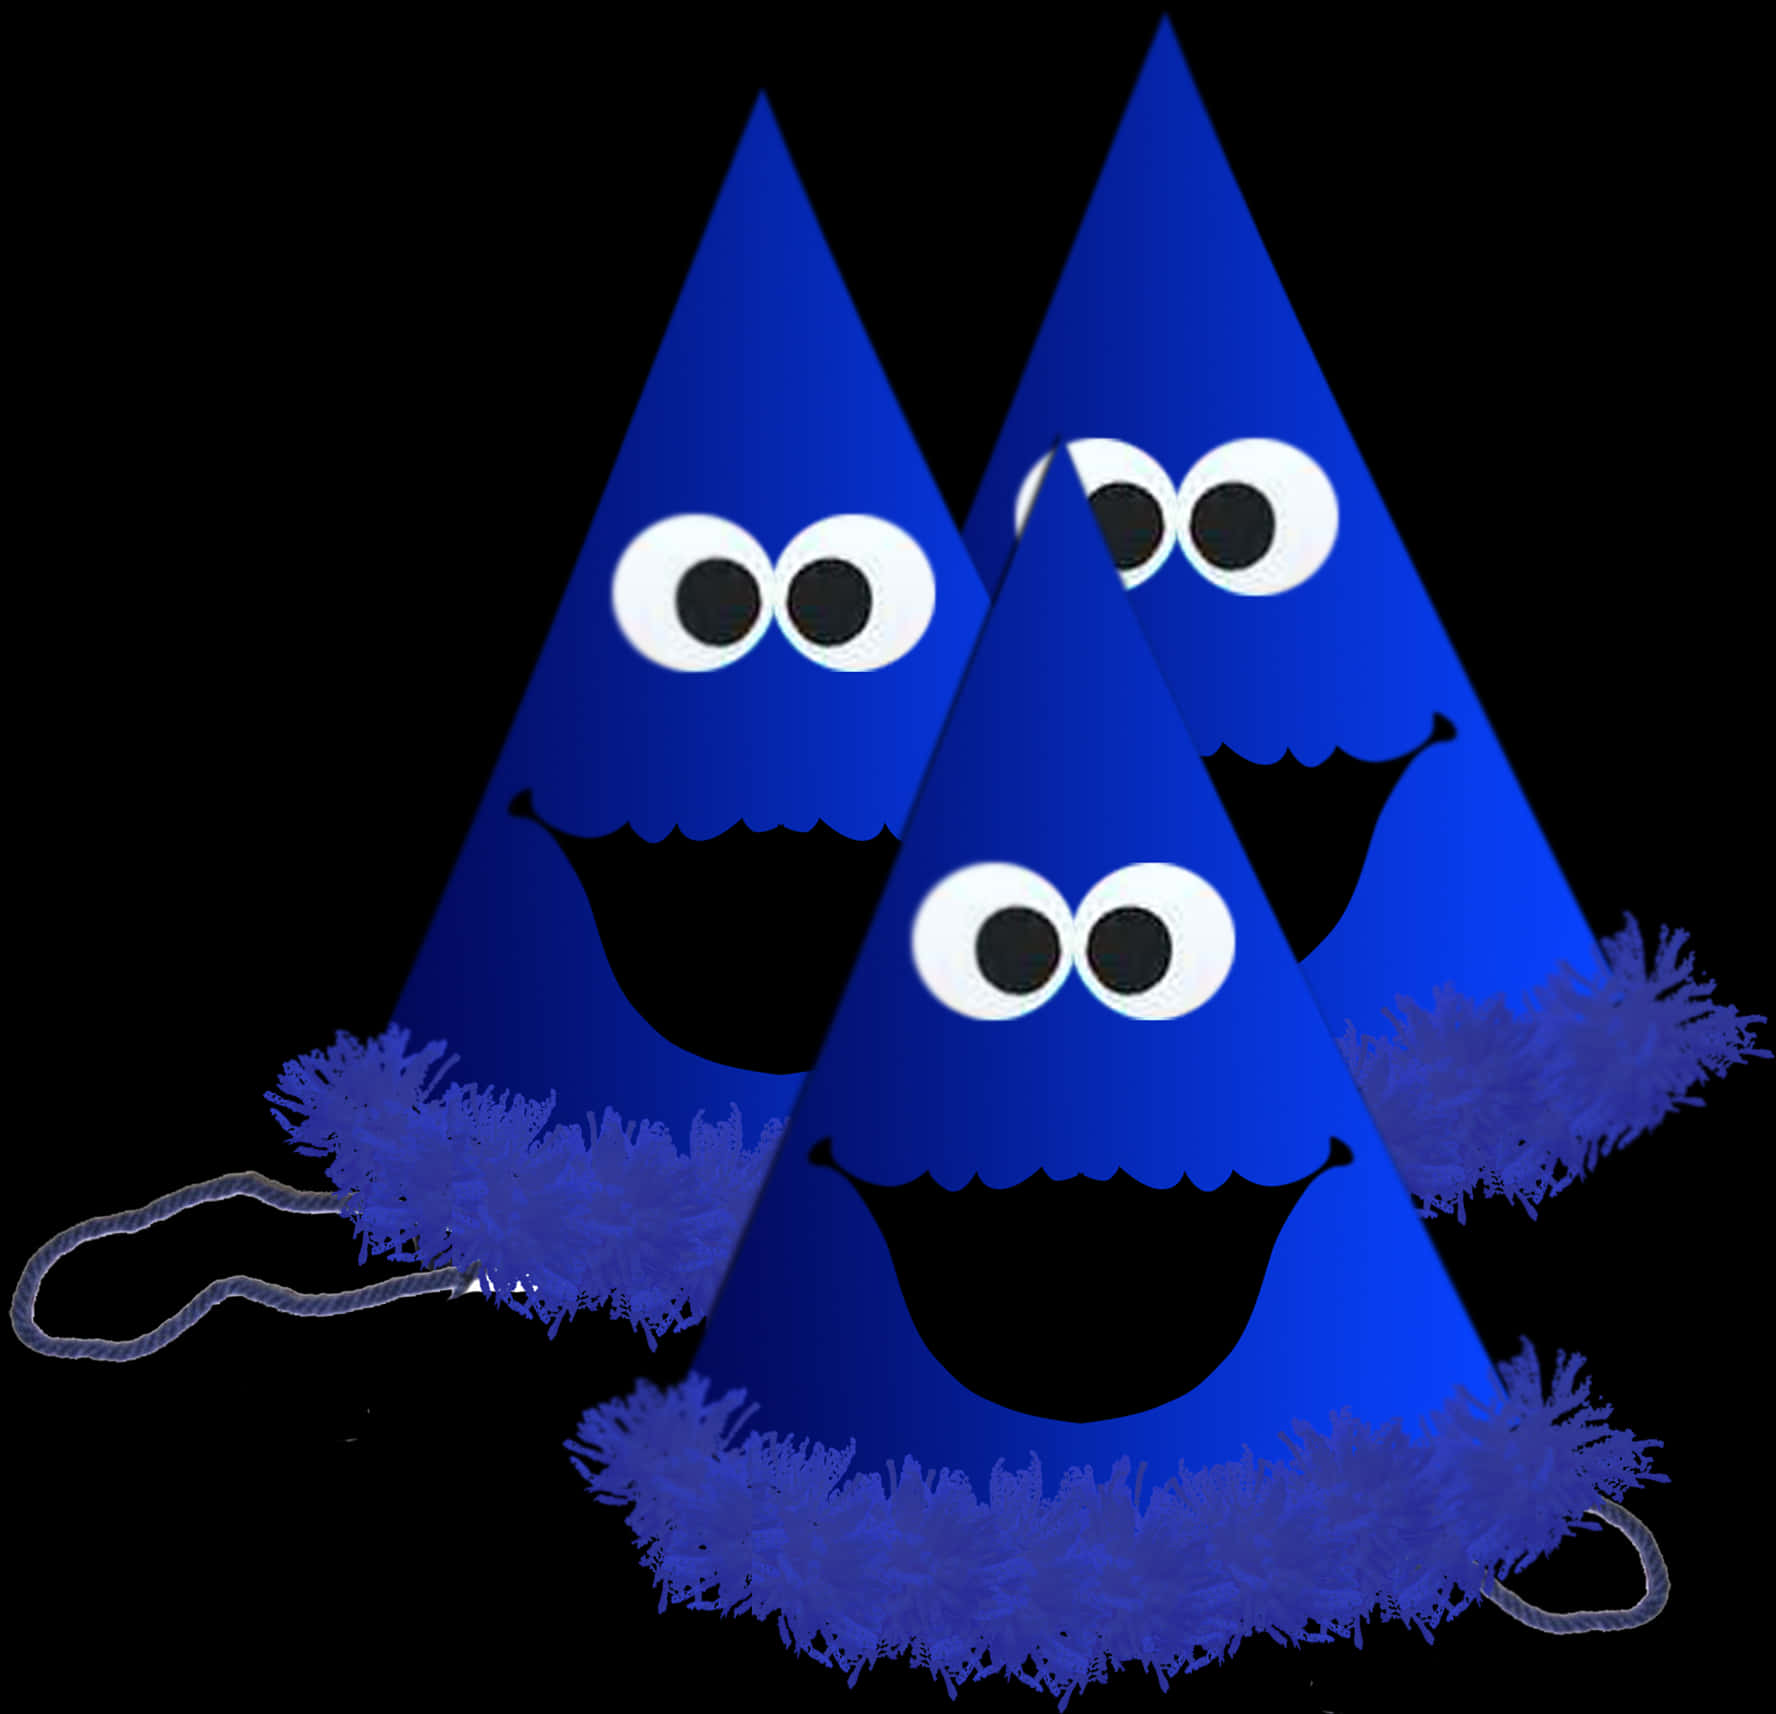 Blue Party Hats Cartoon Faces PNG image